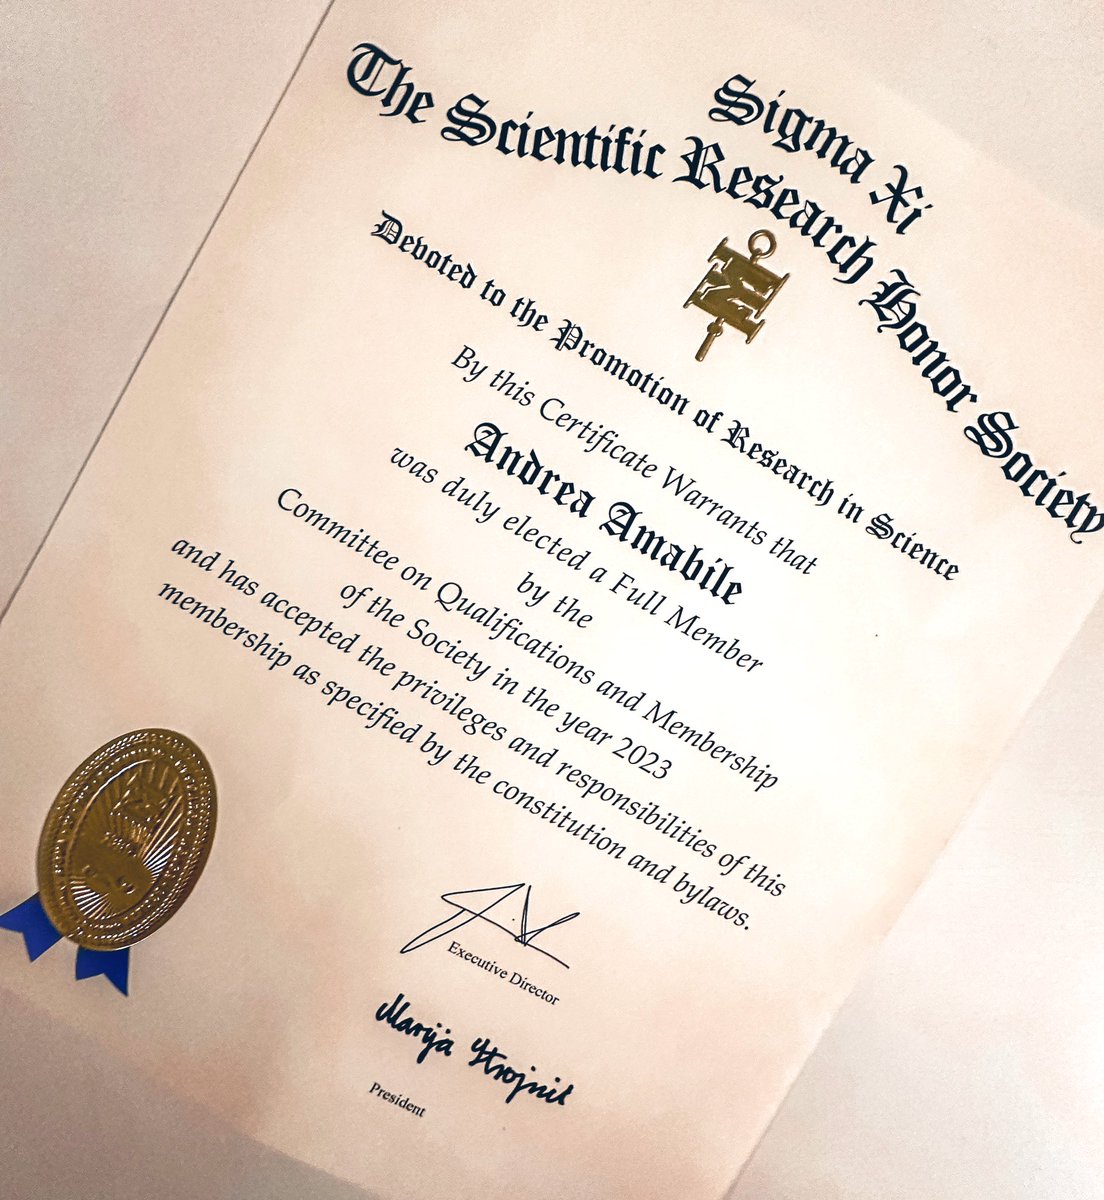 Truly honored and grateful to be inducted as Full Member into the @Yale chapter of Sigma Xi, The Scientific Research Honor Society 🔬 @SigmaXiSociety